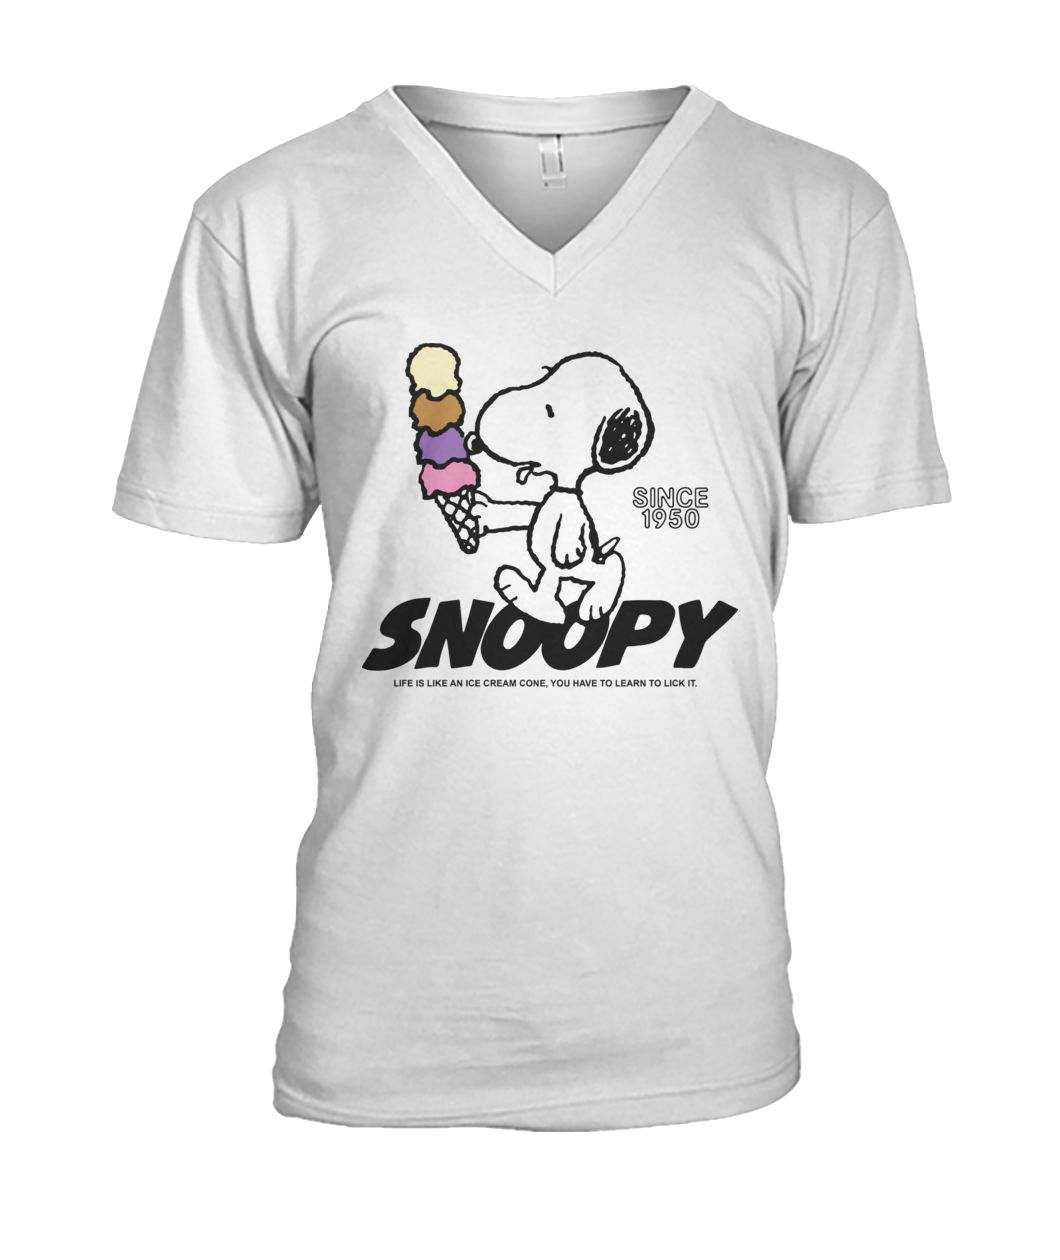 Snoopy life is like an ice cream cone you have to learn to lick it mens v-neck